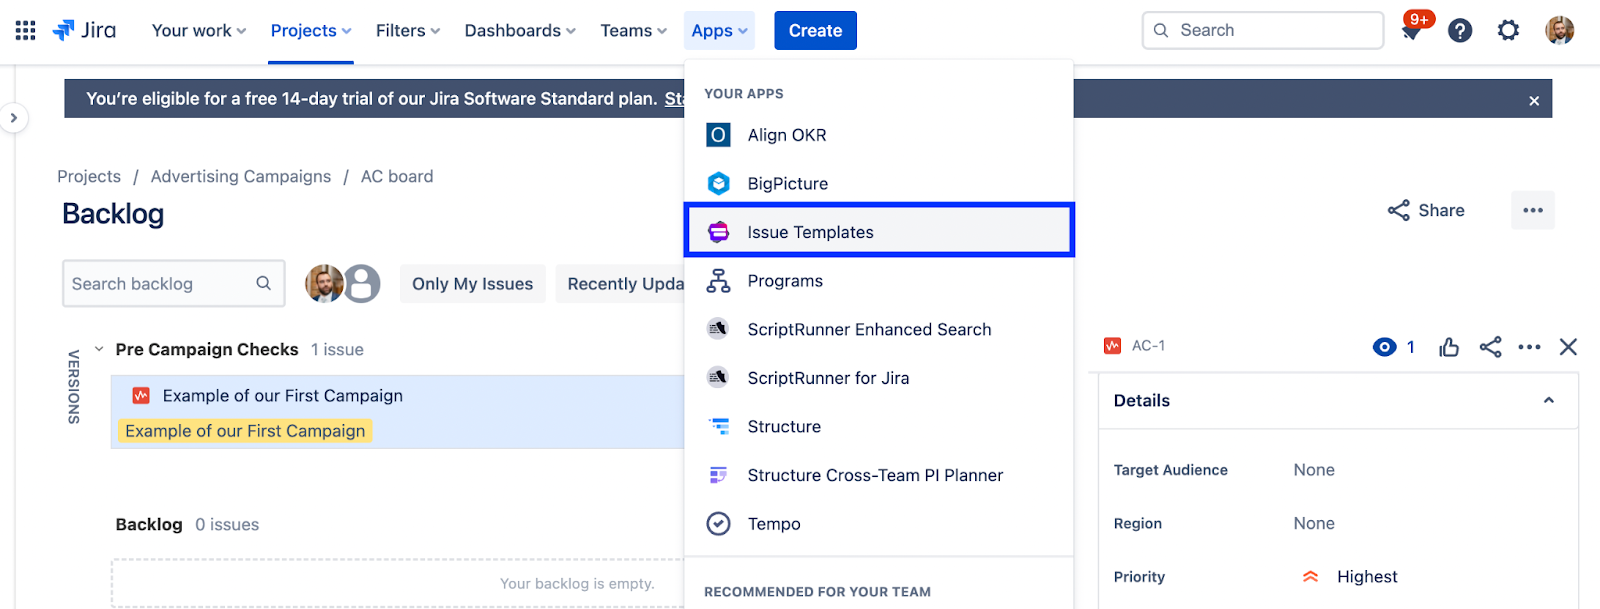 Templating.app - Standard approach to creating (social) media - Issue Templates in Apps menu in Jira